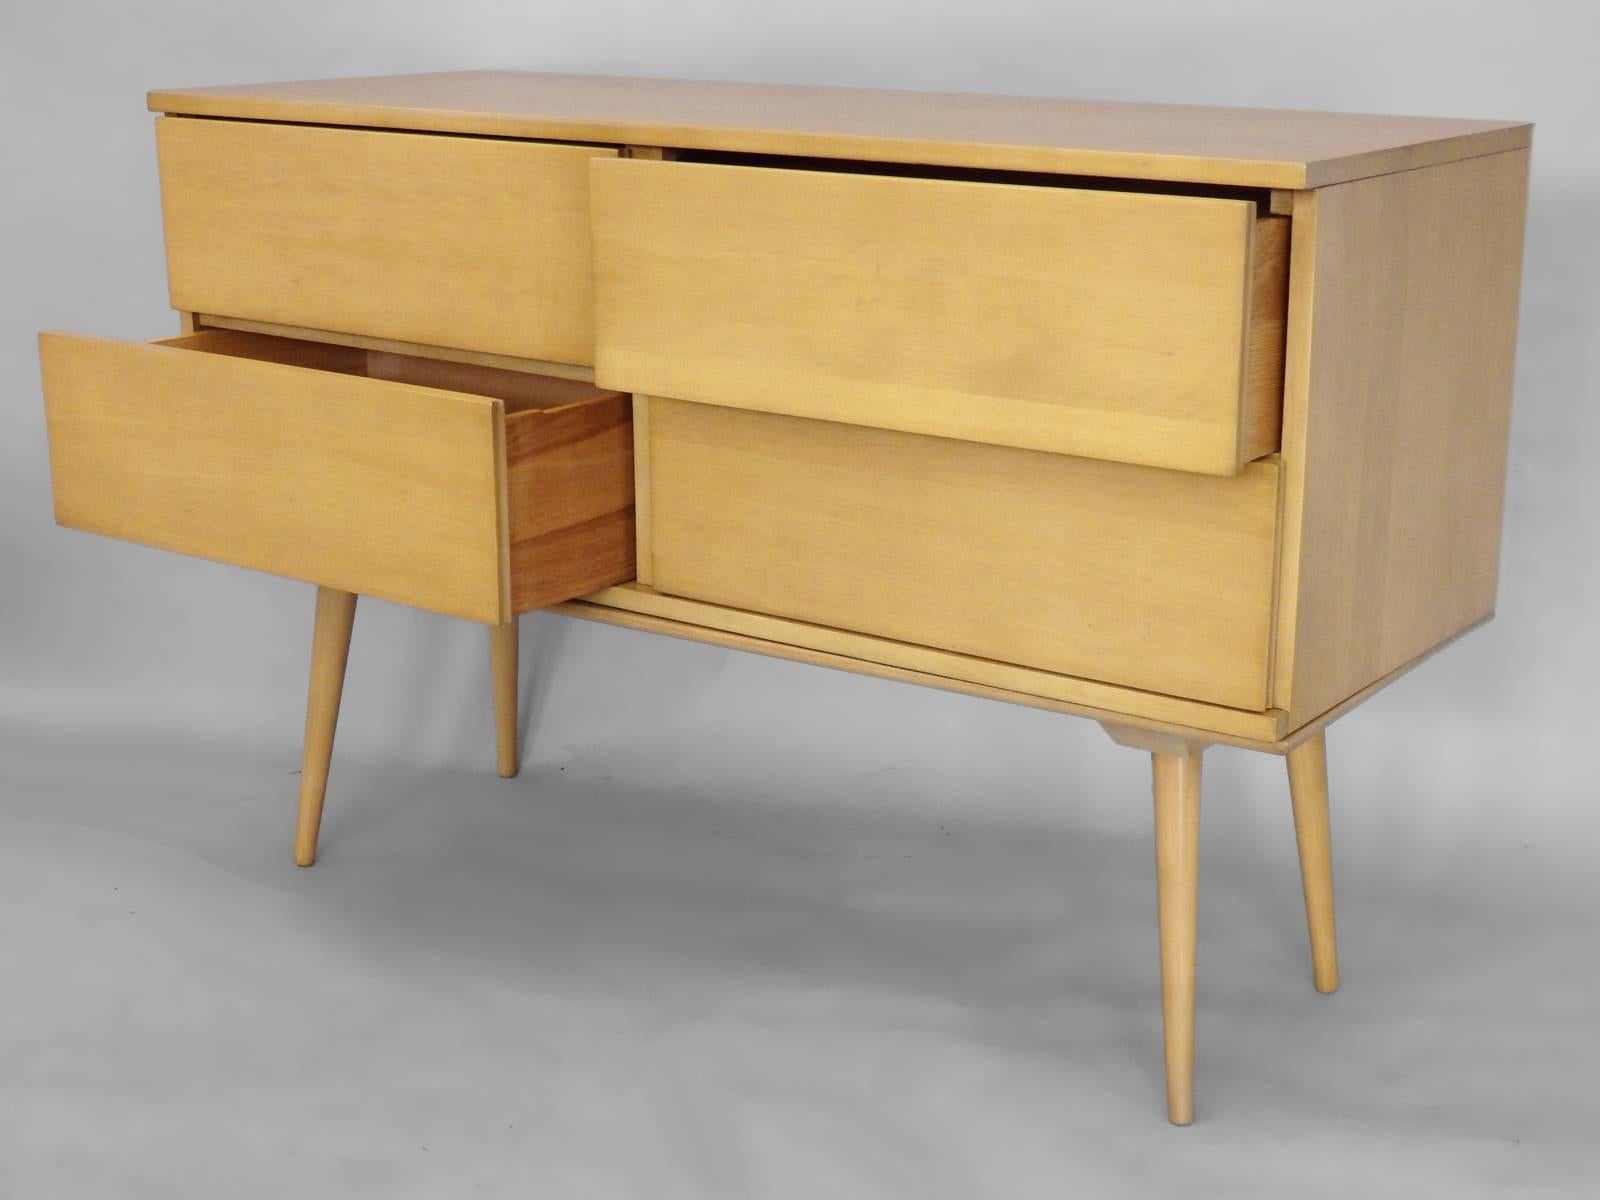 Four drawer cabinet on bench designed very much in the style of Paul McCobb. Actually designed or copied by disgruntled ex employee Marc Berge.
Cabinet:without bench  16.5